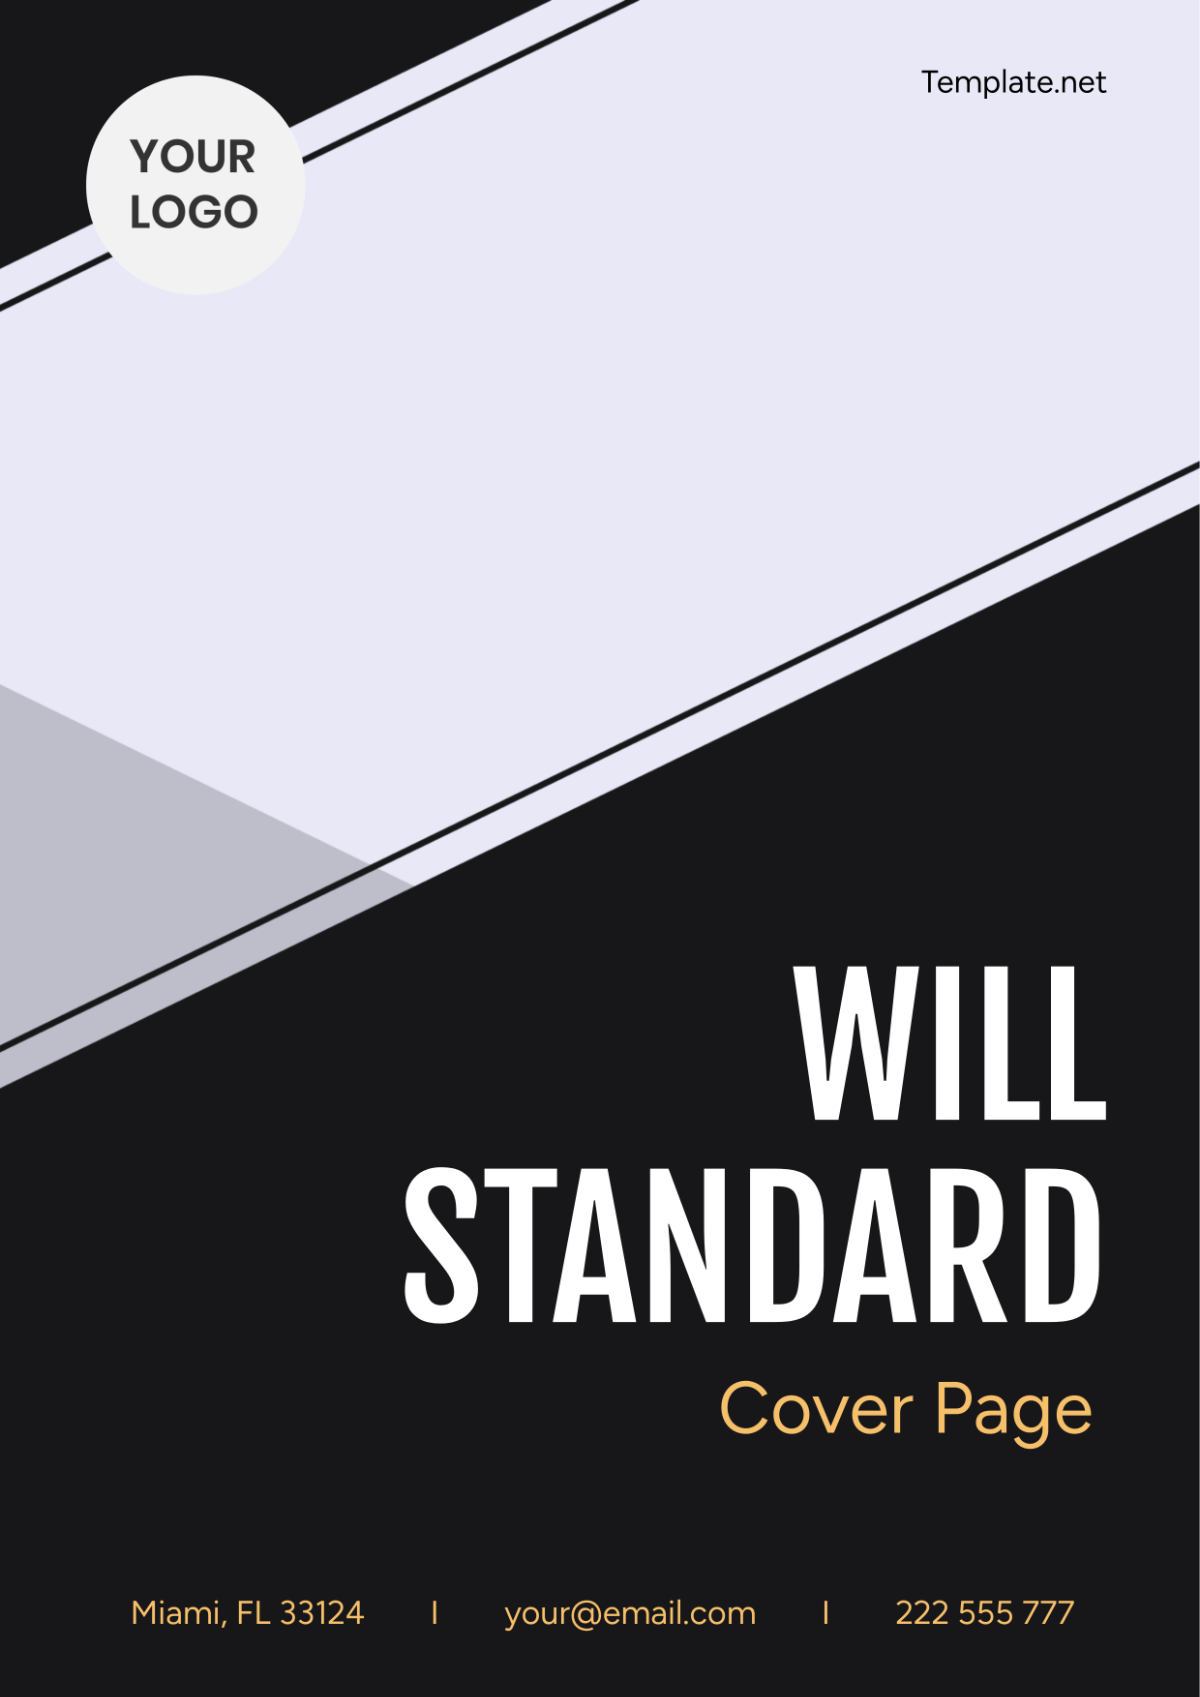 Will Standard Cover Page Template